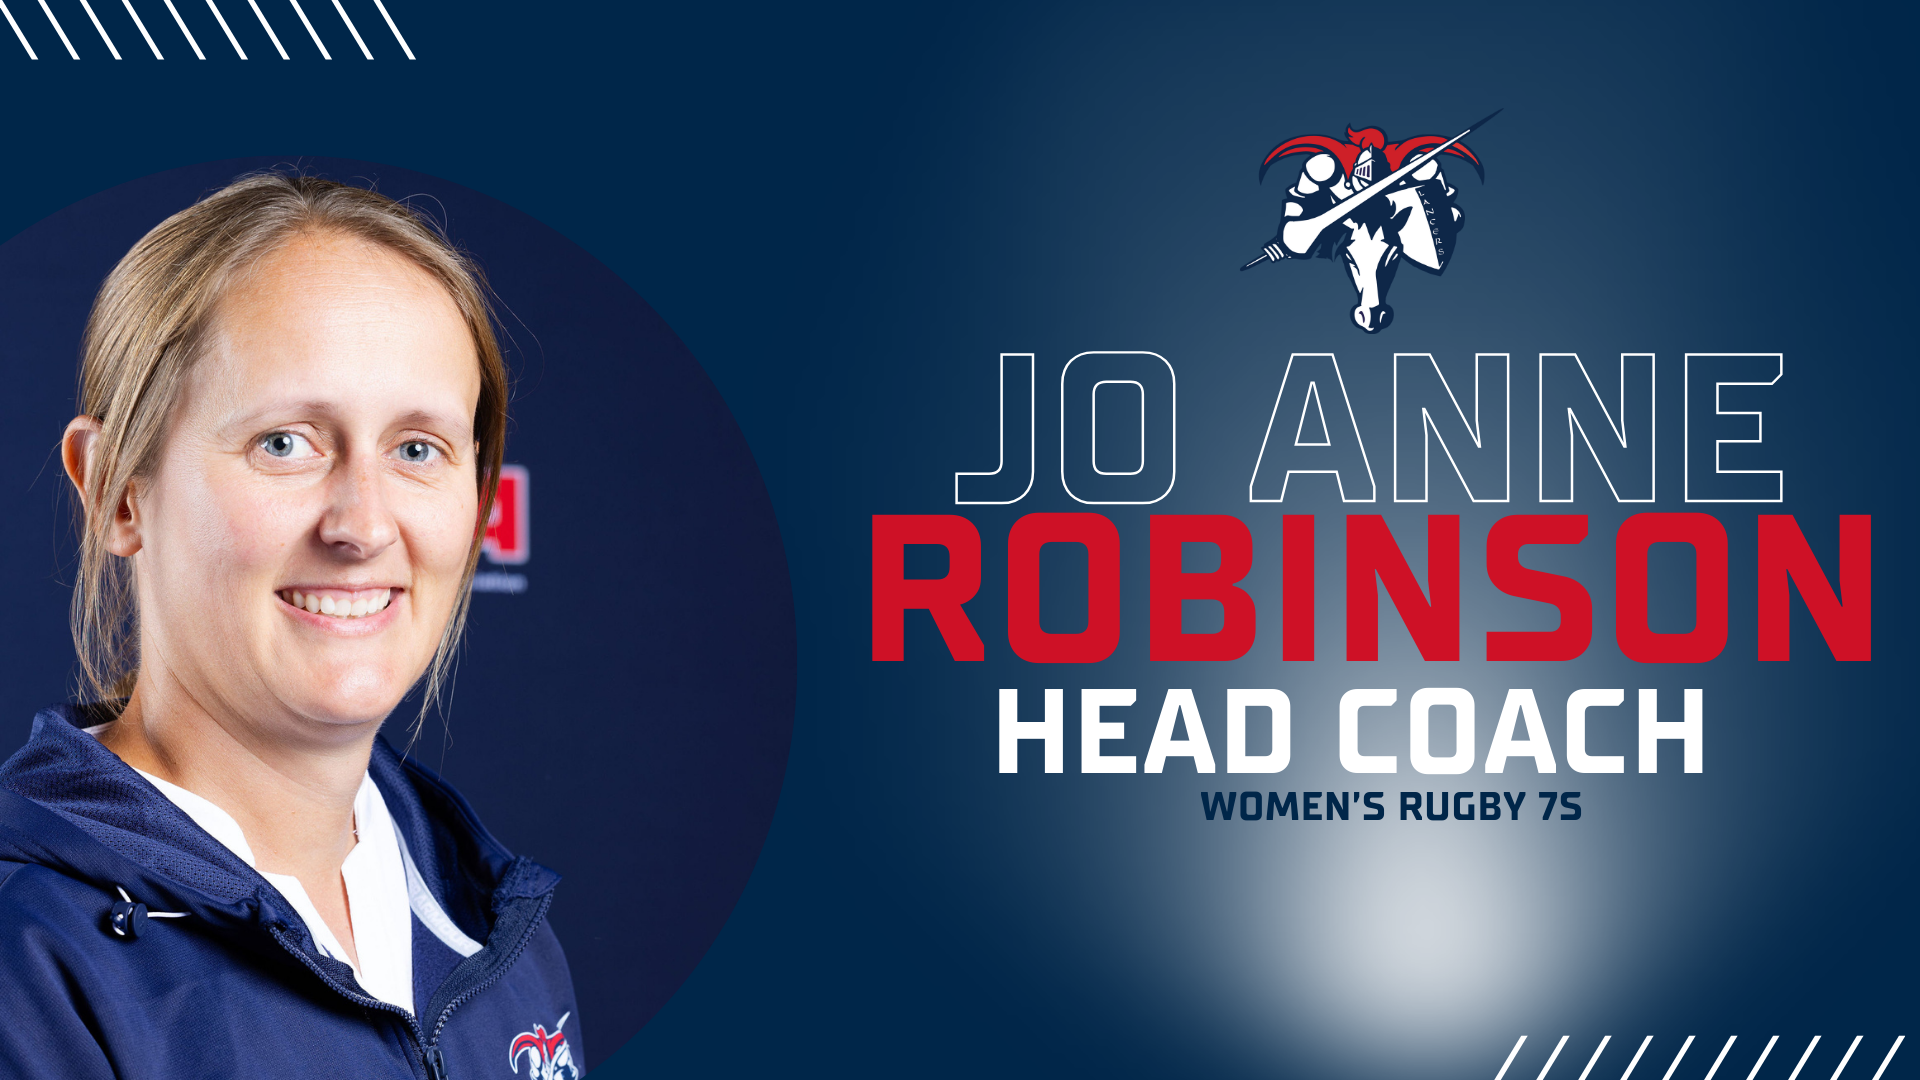 ROBINSON NAMED NEW WOMEN'S RUGBY 7S COACH